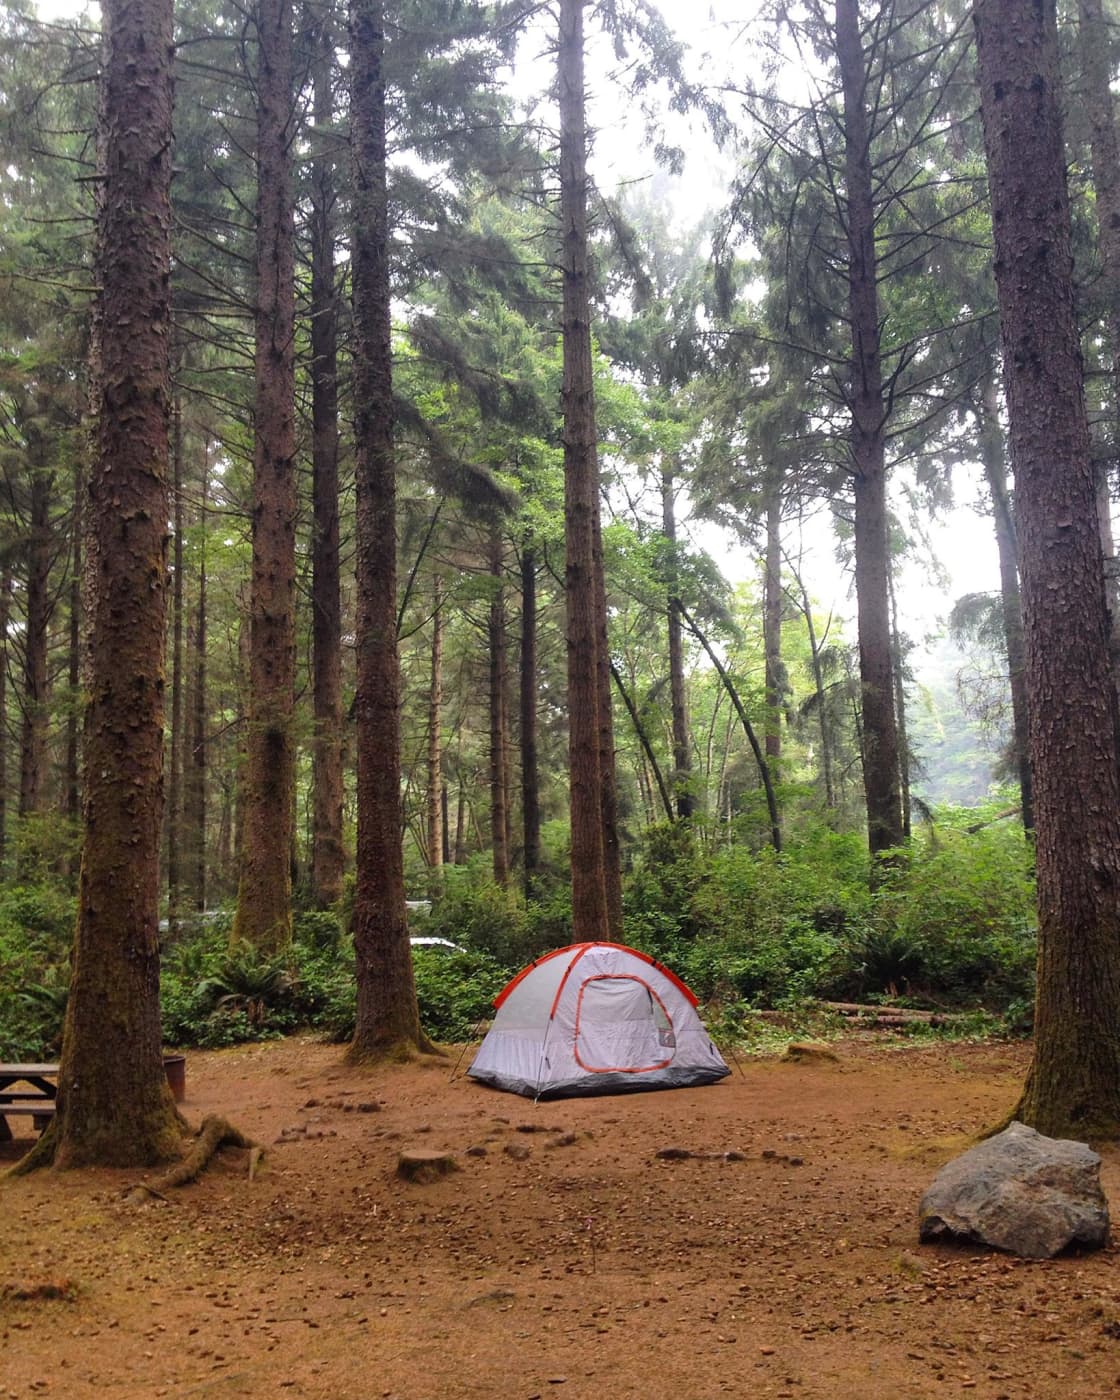 Abalone Campground is definitely the best campground at this park. Huge towering pine trees! No redwoods but it's got that deep forest feel.